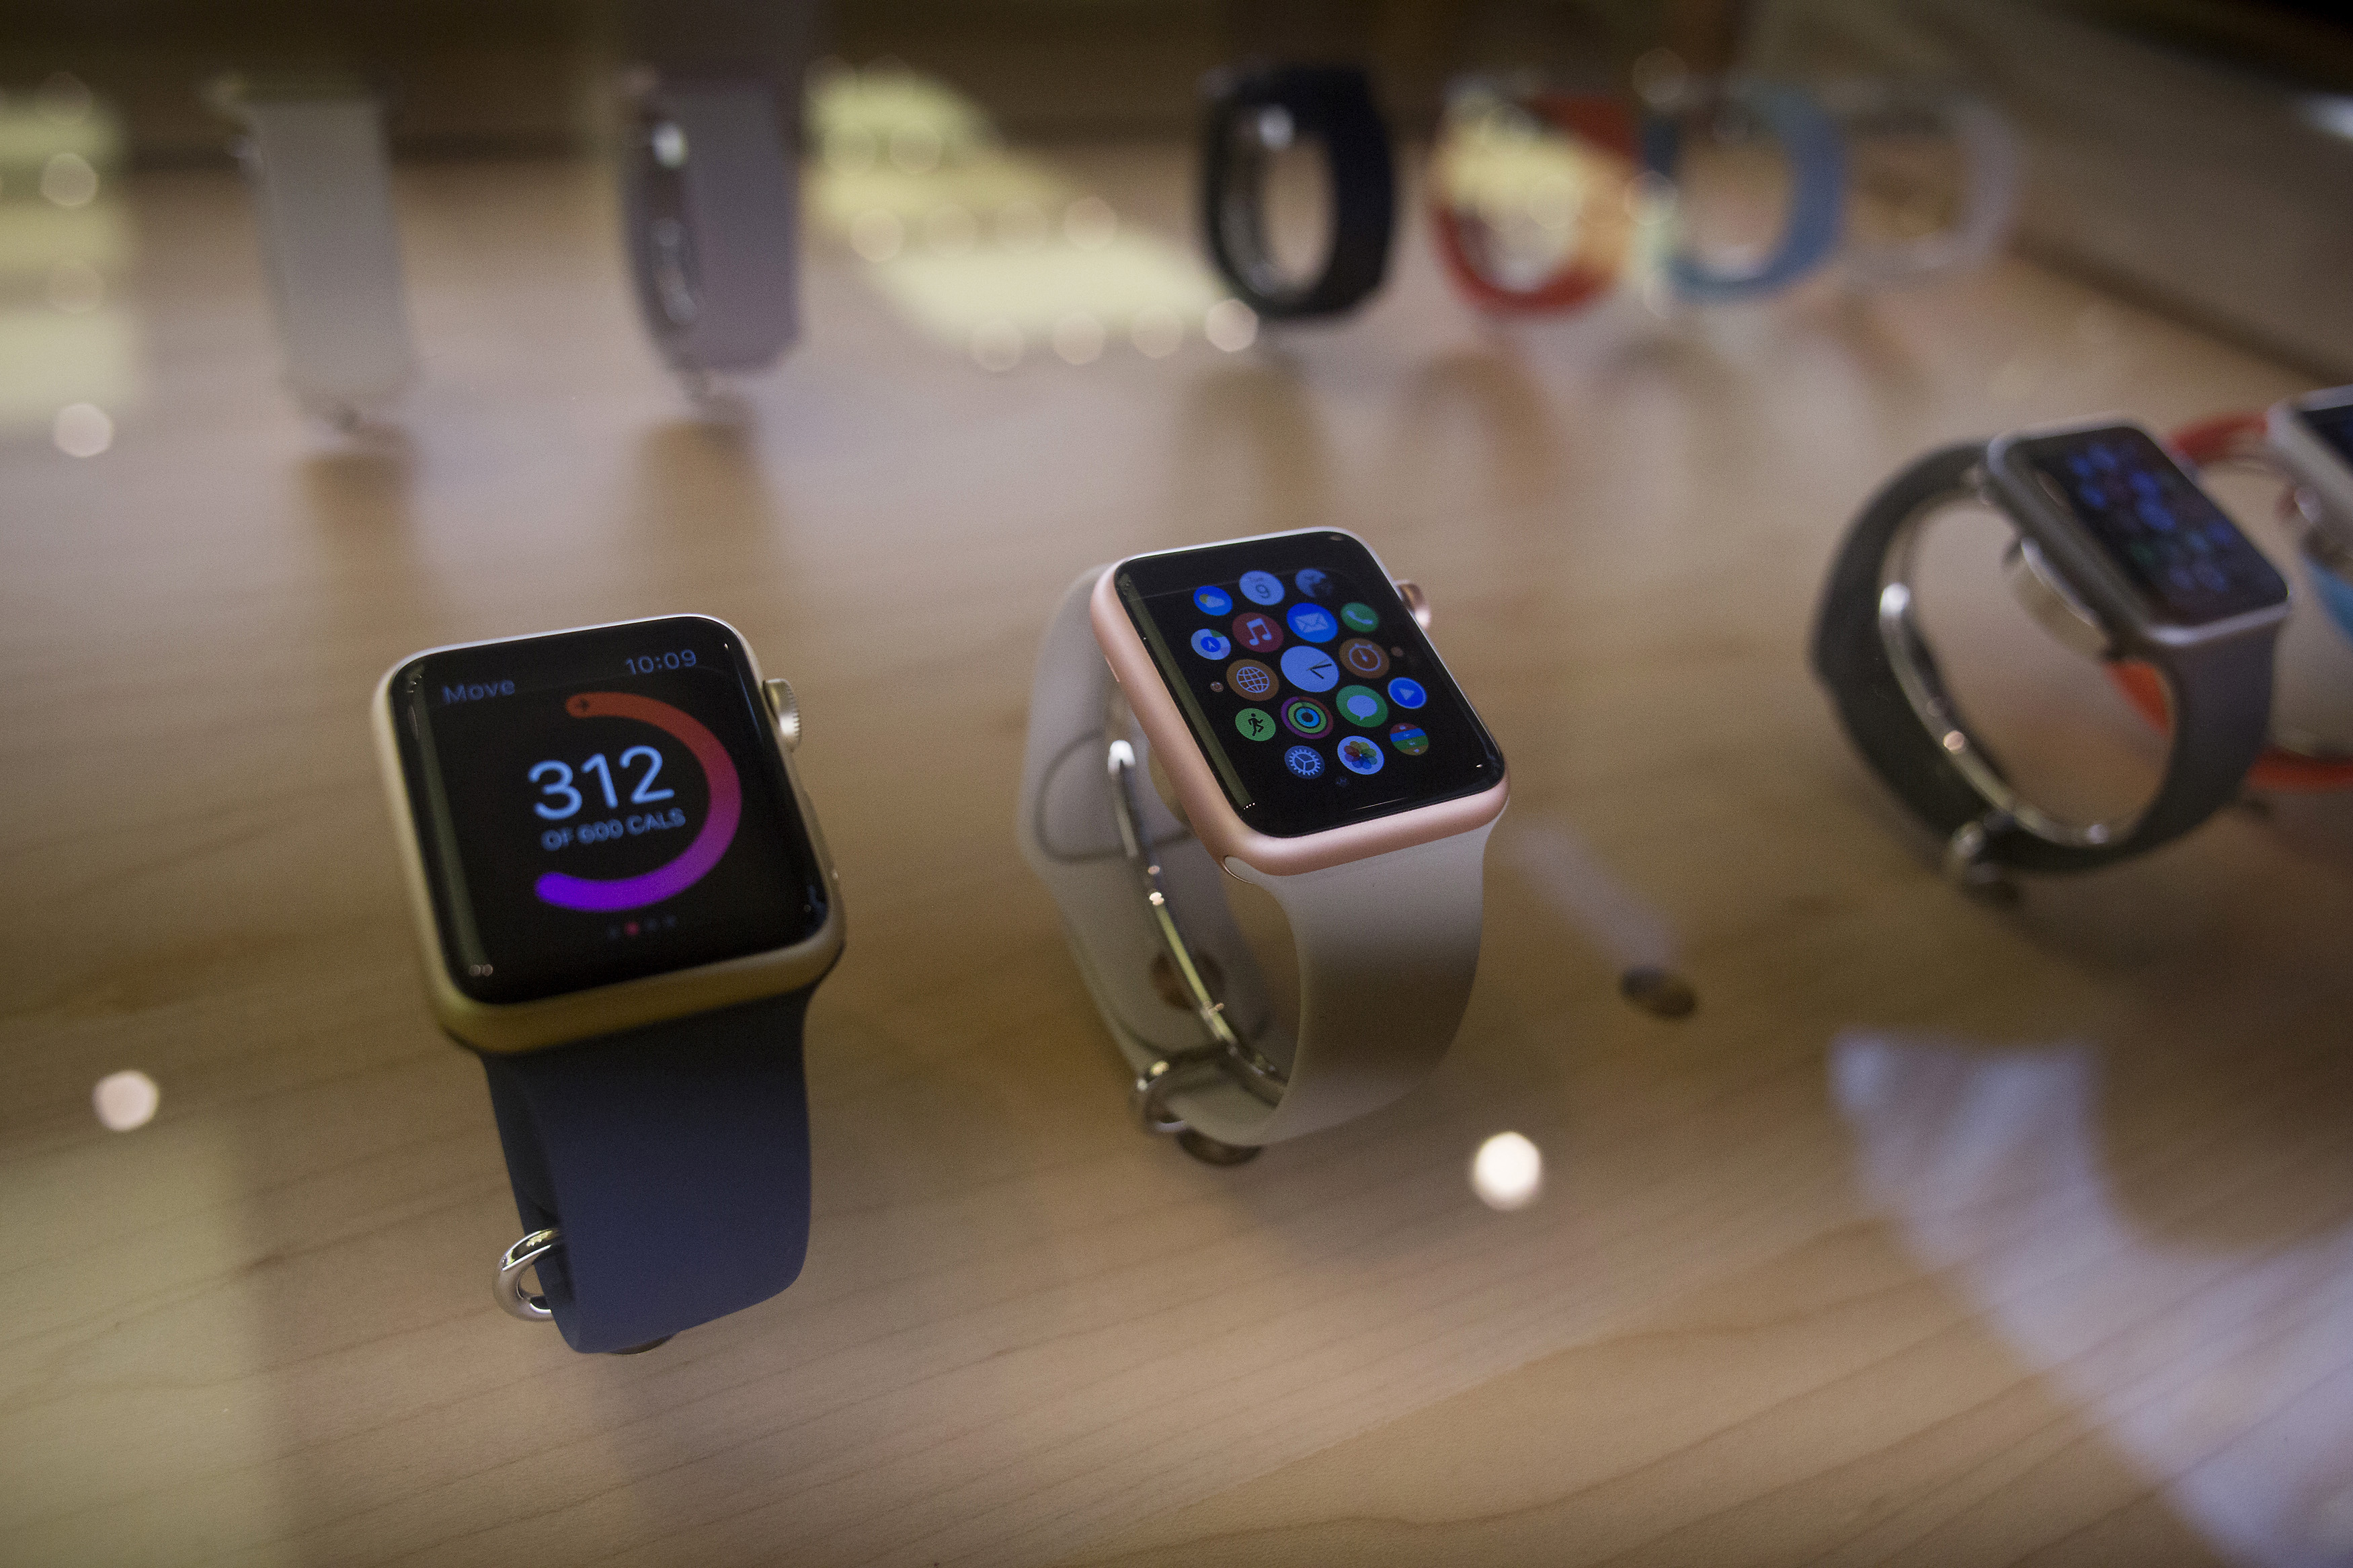 New Apple Watches On Display At The Fifth Avenue Apple Inc. Store